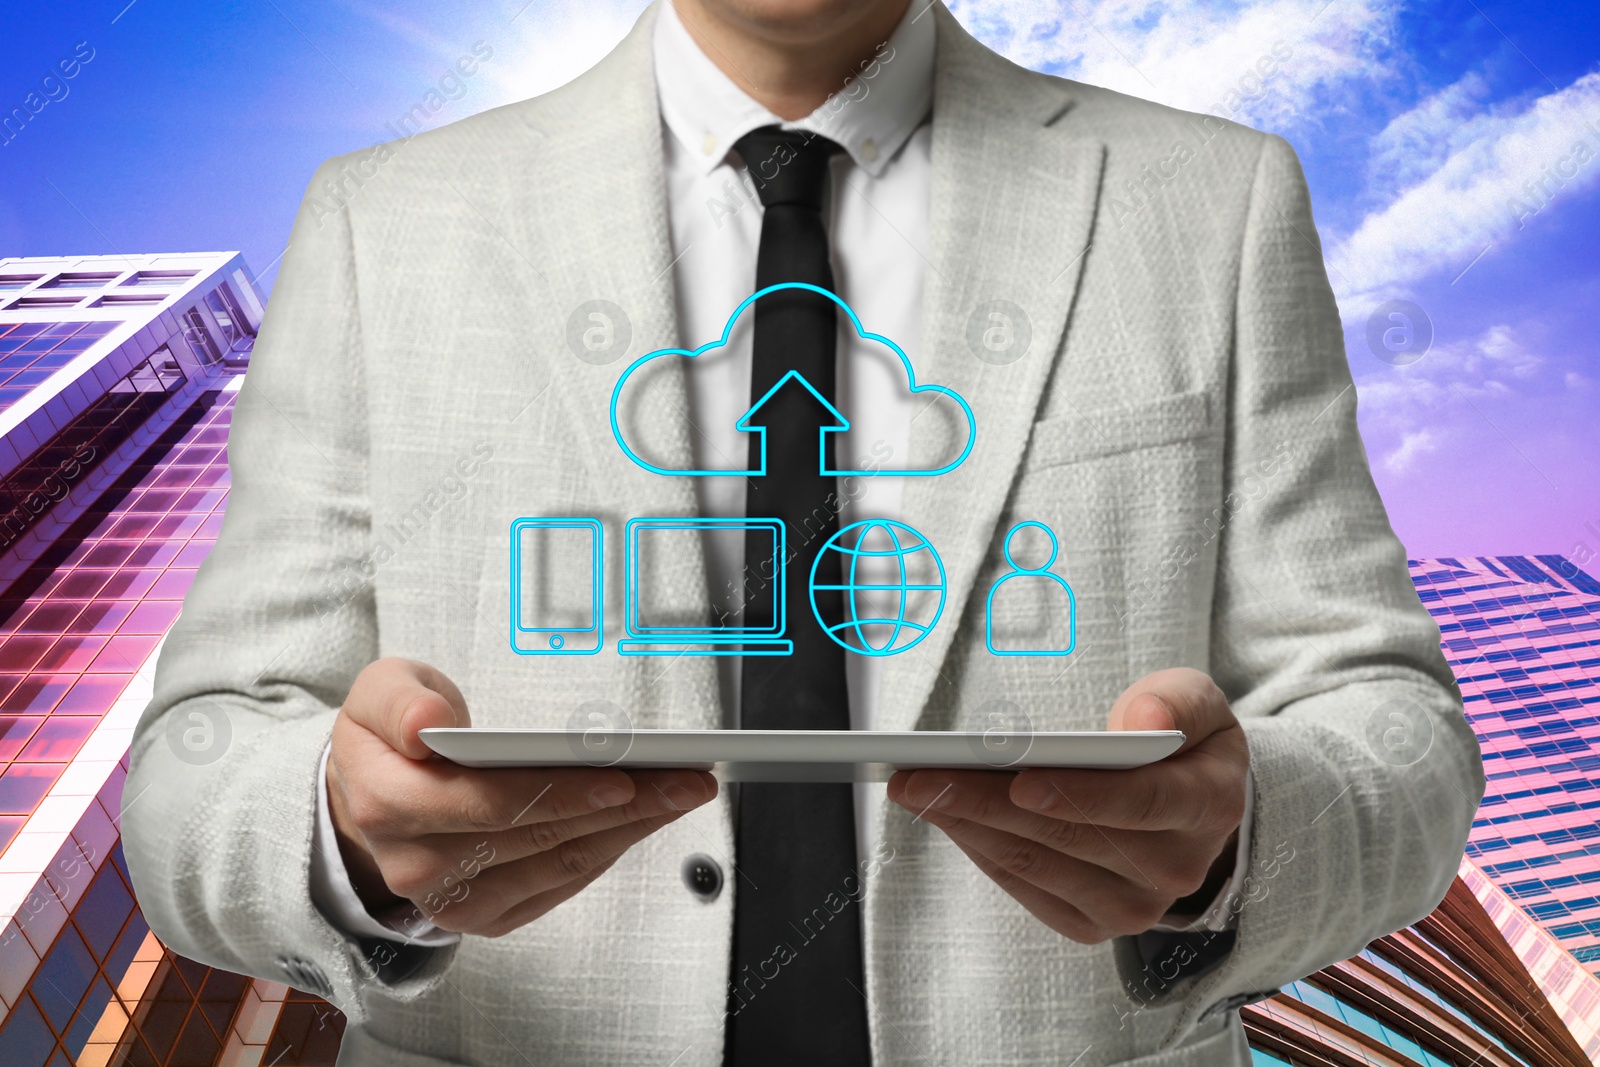 Image of Web hosting. Man holding tablet against buildings, closeup. Digital cloud with arrow and icons over gadget